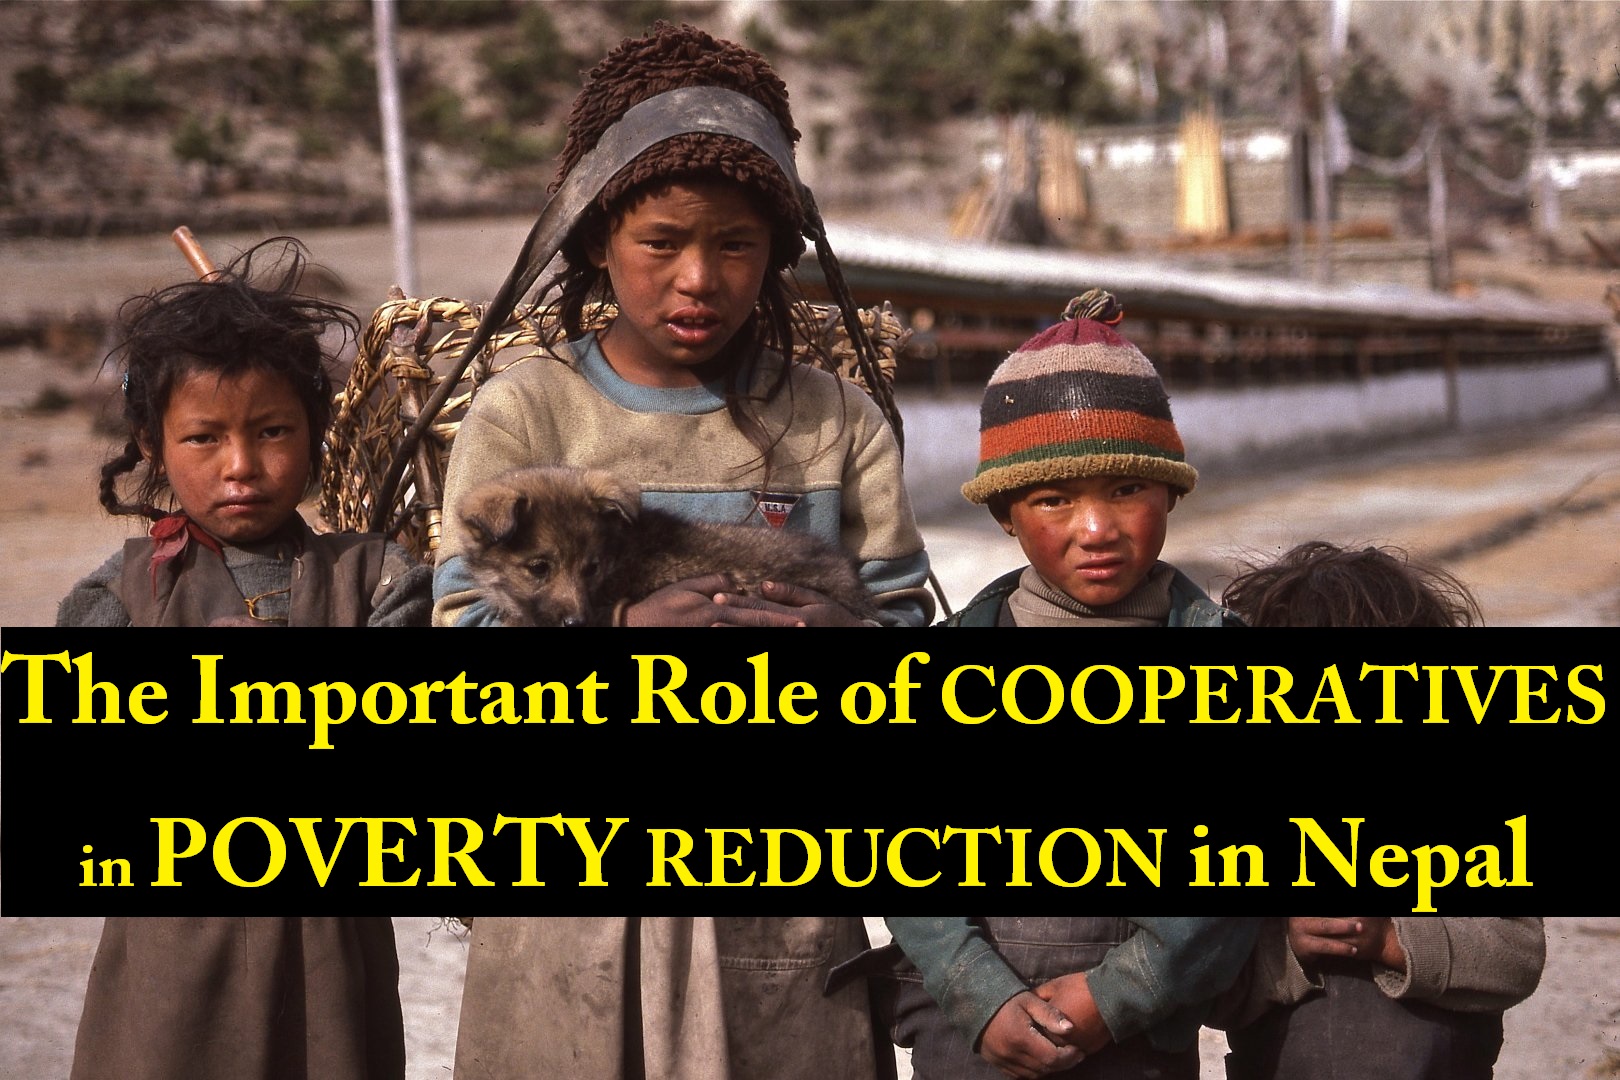 The Important Role of COOPERATIVES in POVERTY REDUCTION in Nepal